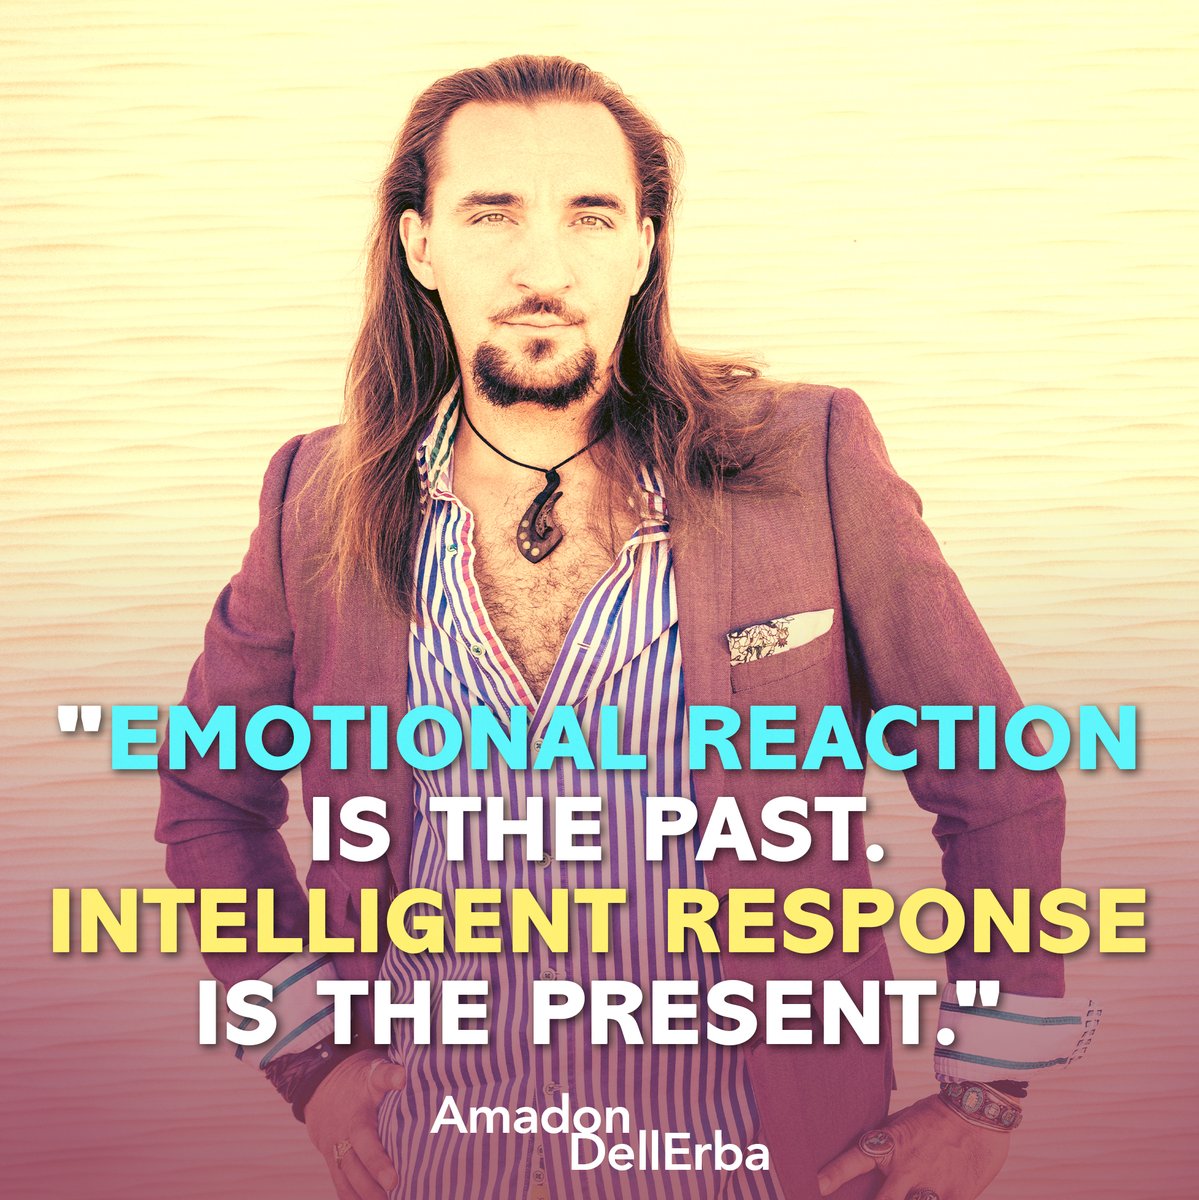 'Emotional reaction is the past. Intelligent response is the present.'
@Amadon_DellErba 
'Fight or Flight? ...Neither'
#getrealordietrying #fightorflight #emotionalreponse #emotionalreaction #emotionalreactions #intelligentreponse 
#podcast #podcasters #podcasting #podcasts